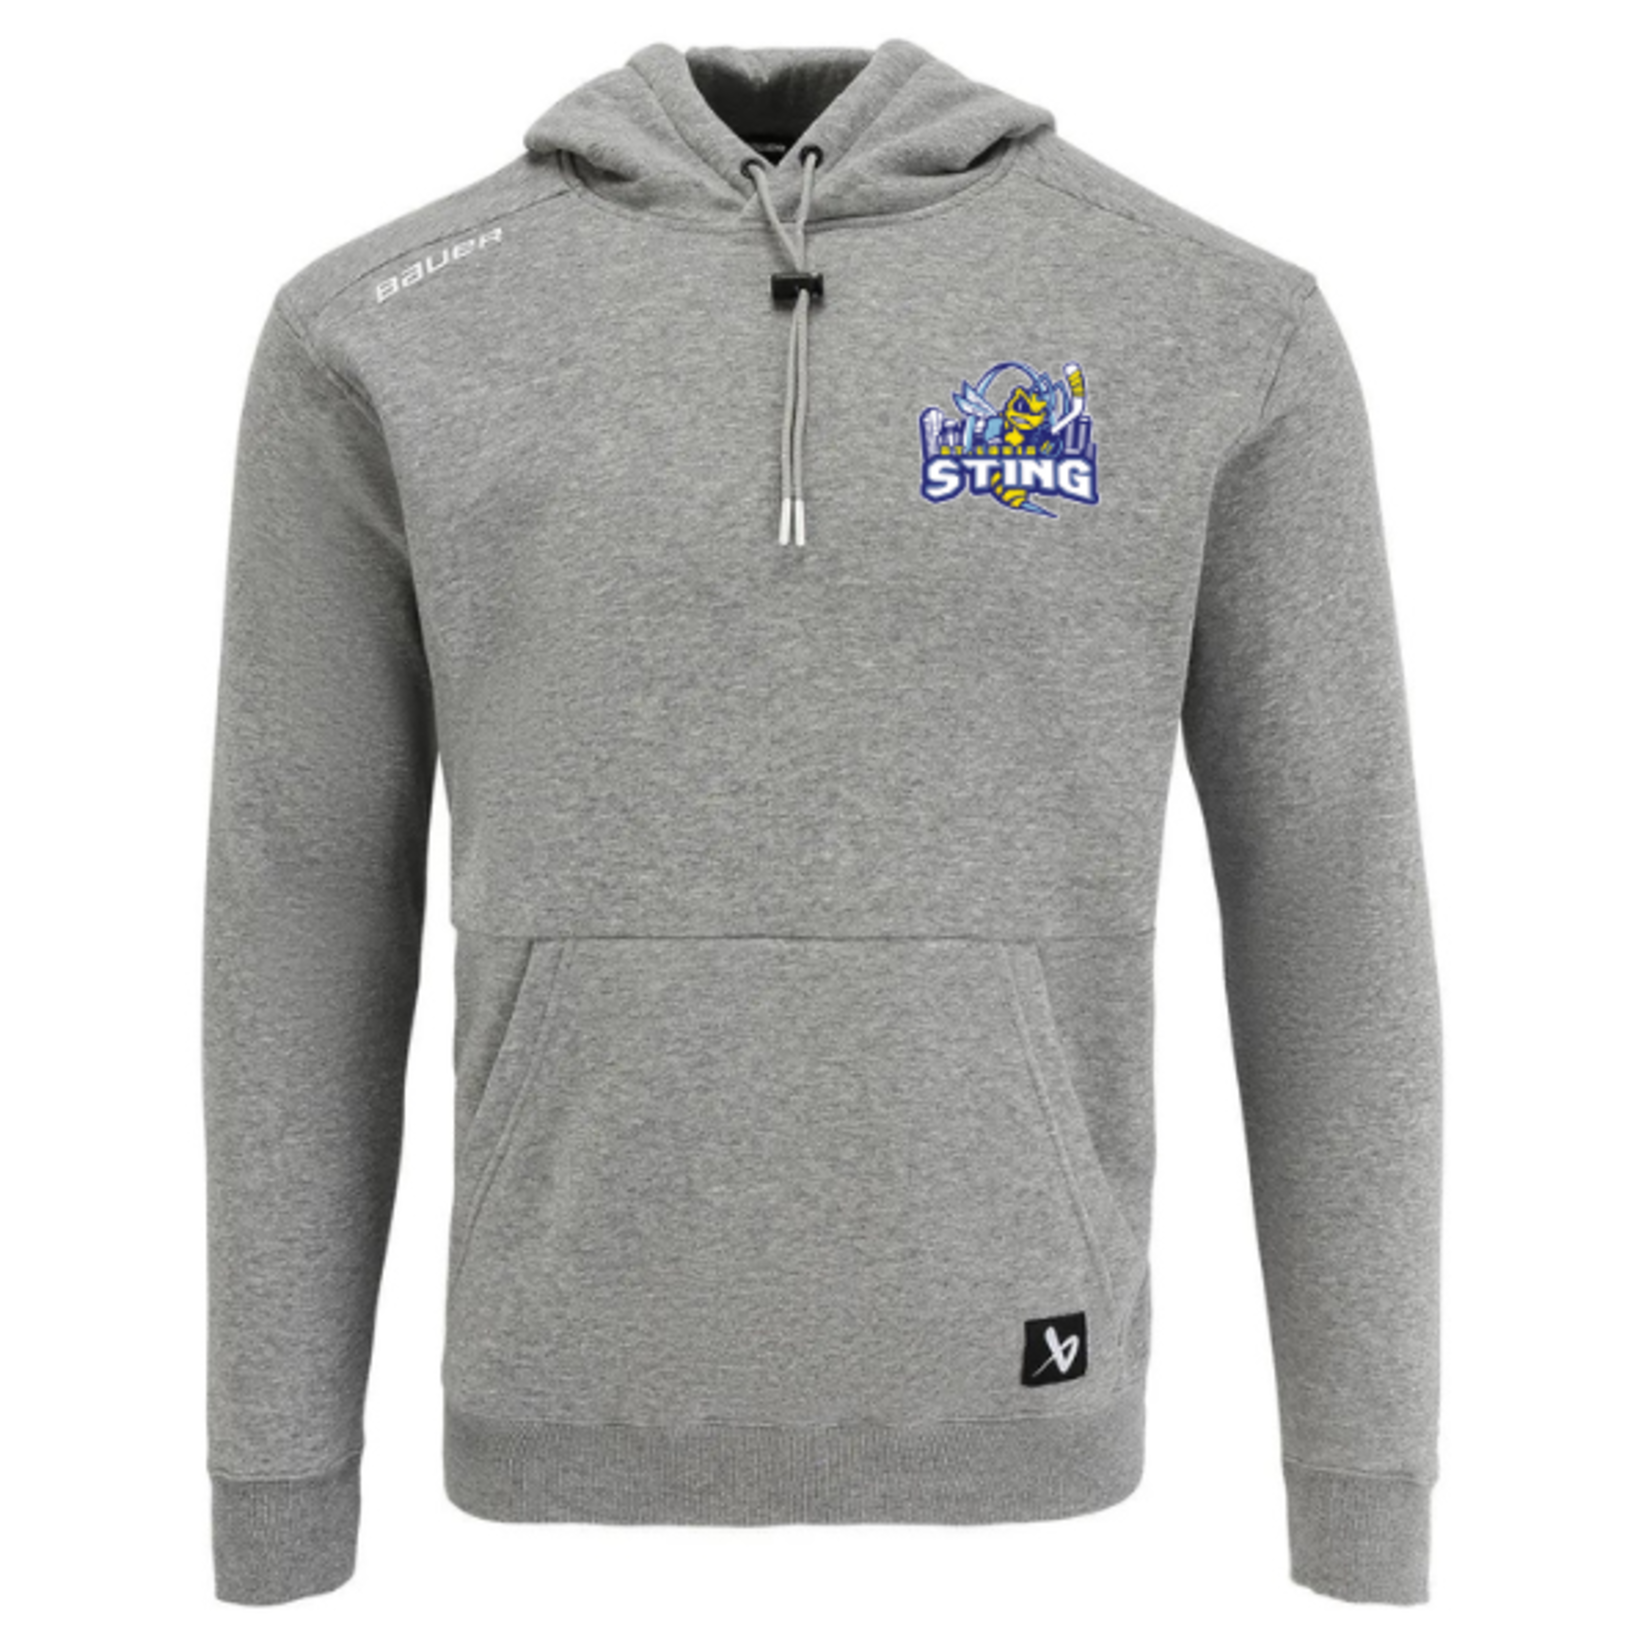 Bauer STING Bauer Ultimate Hoodie (YOUTH) GREY